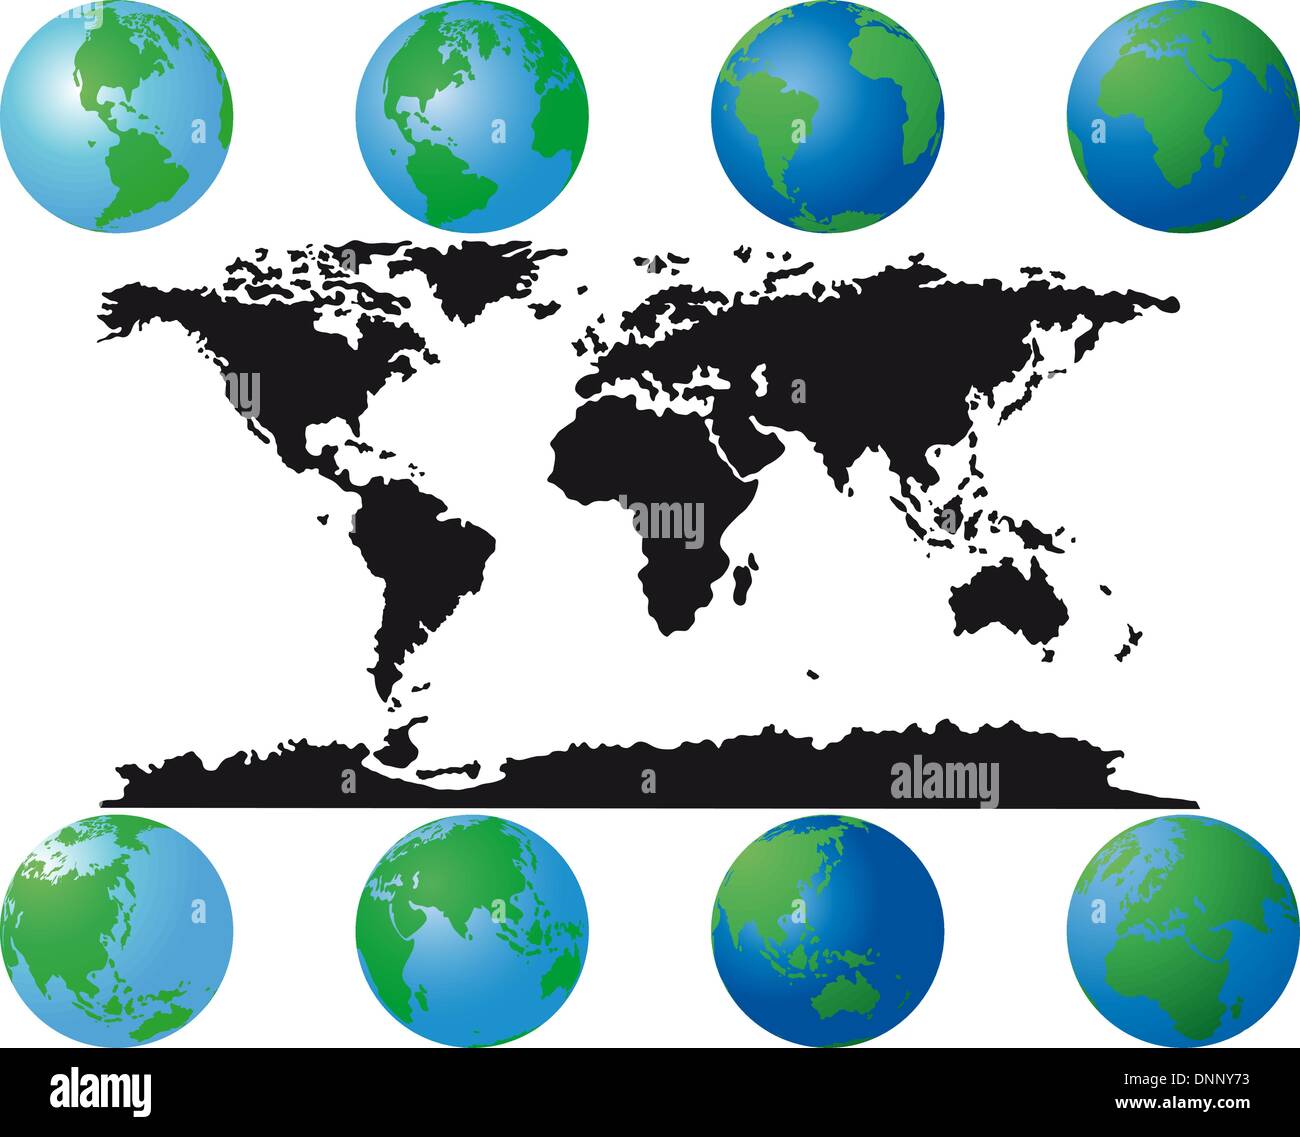 Set of world globes for design use Stock Vector